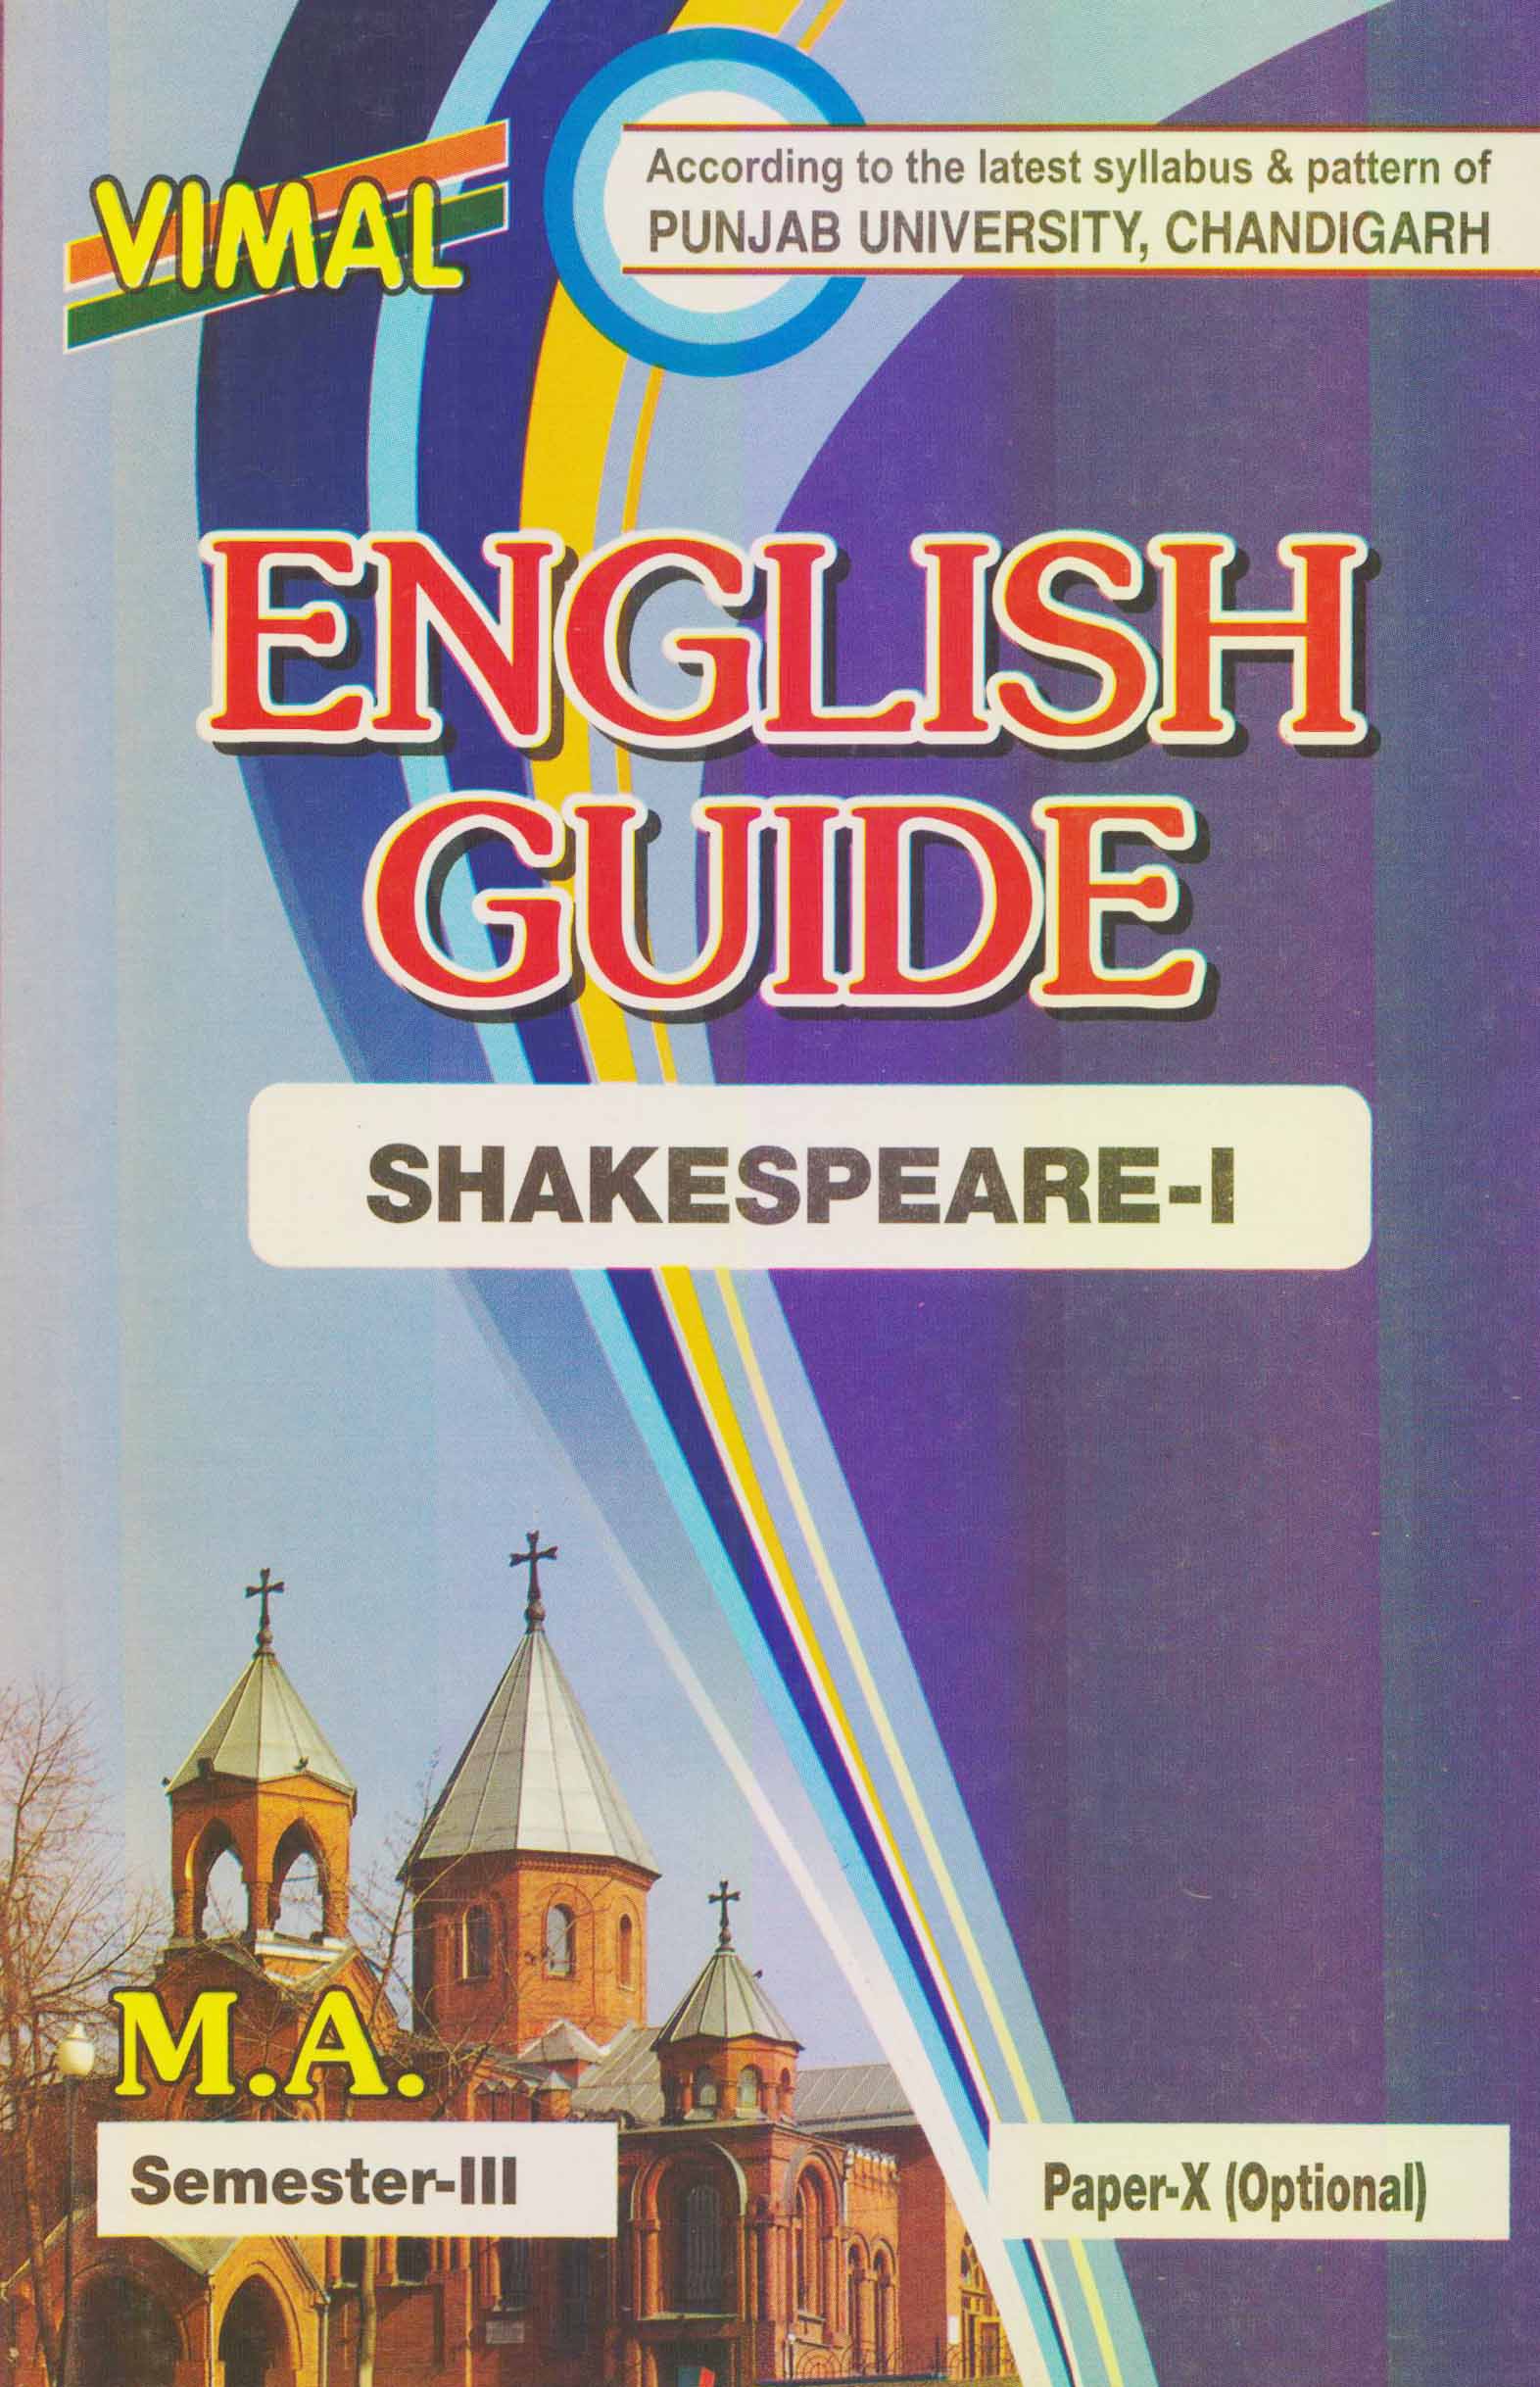 Vimal English Guide Shakespeare-I for M.A. Sem. 3, Paper X (Optional) New Edition